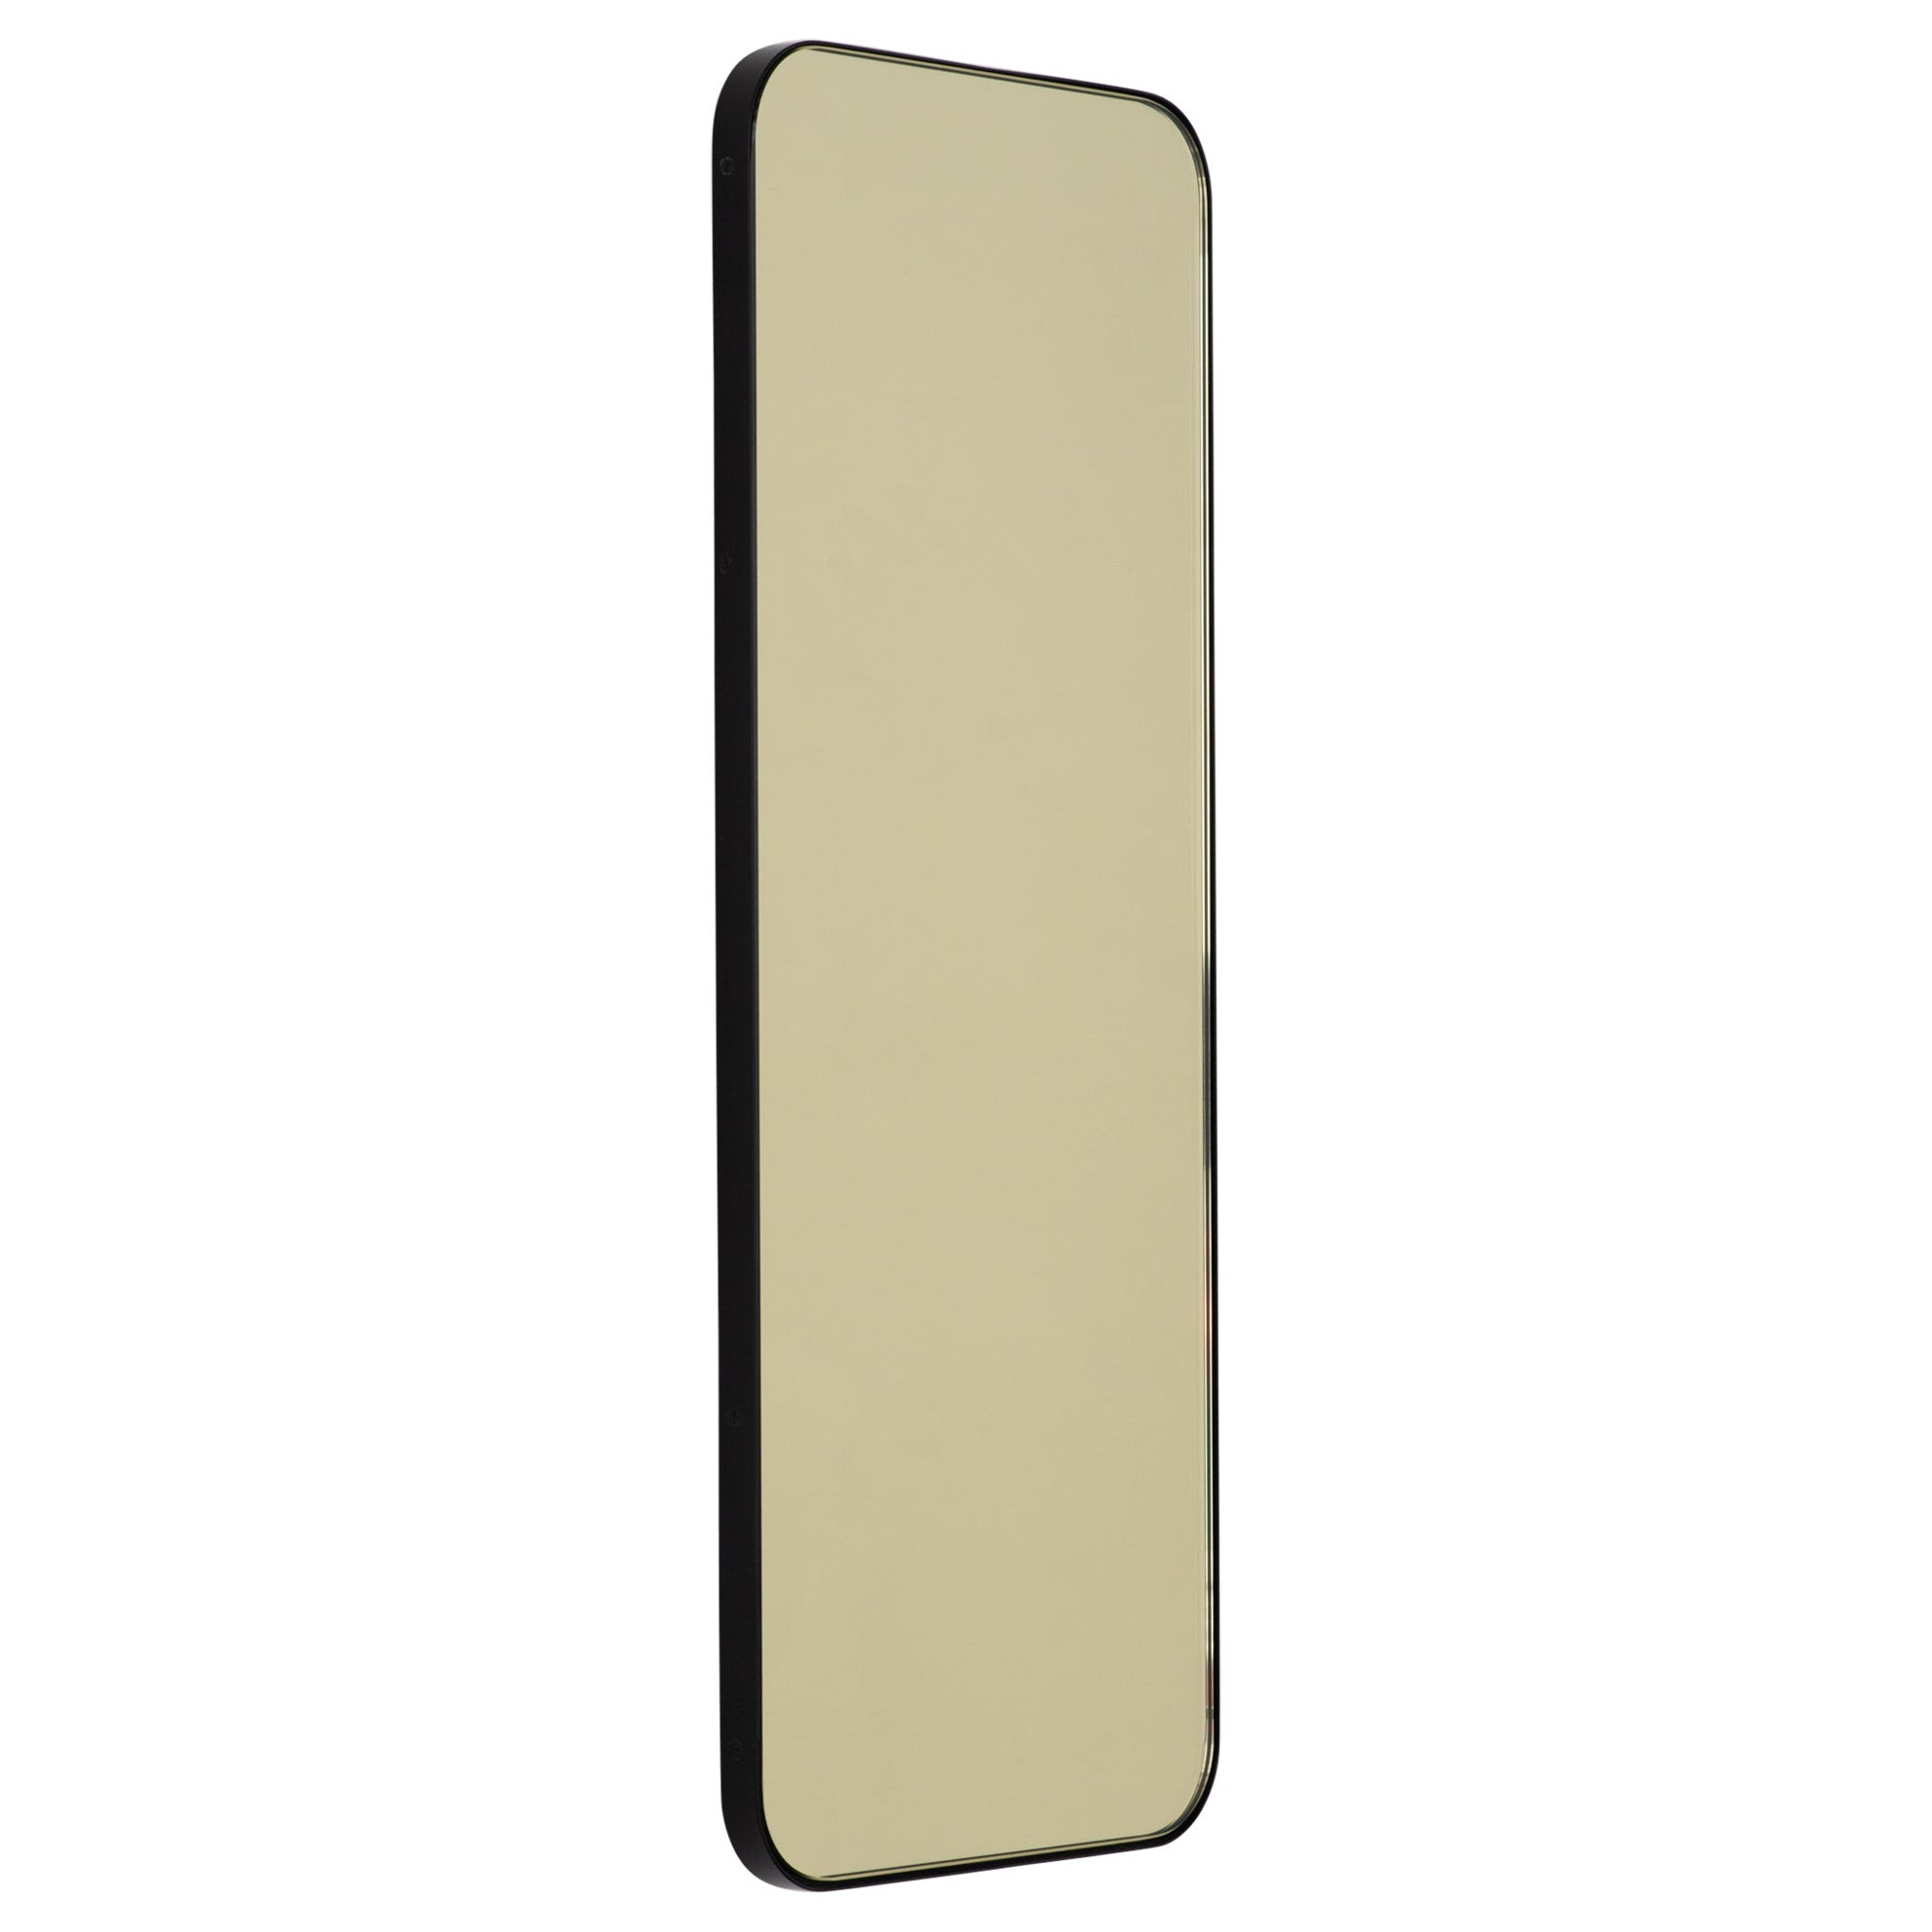 Quadris Gold Tinted Rectangular Contemporary Mirror with a Black Frame, Large